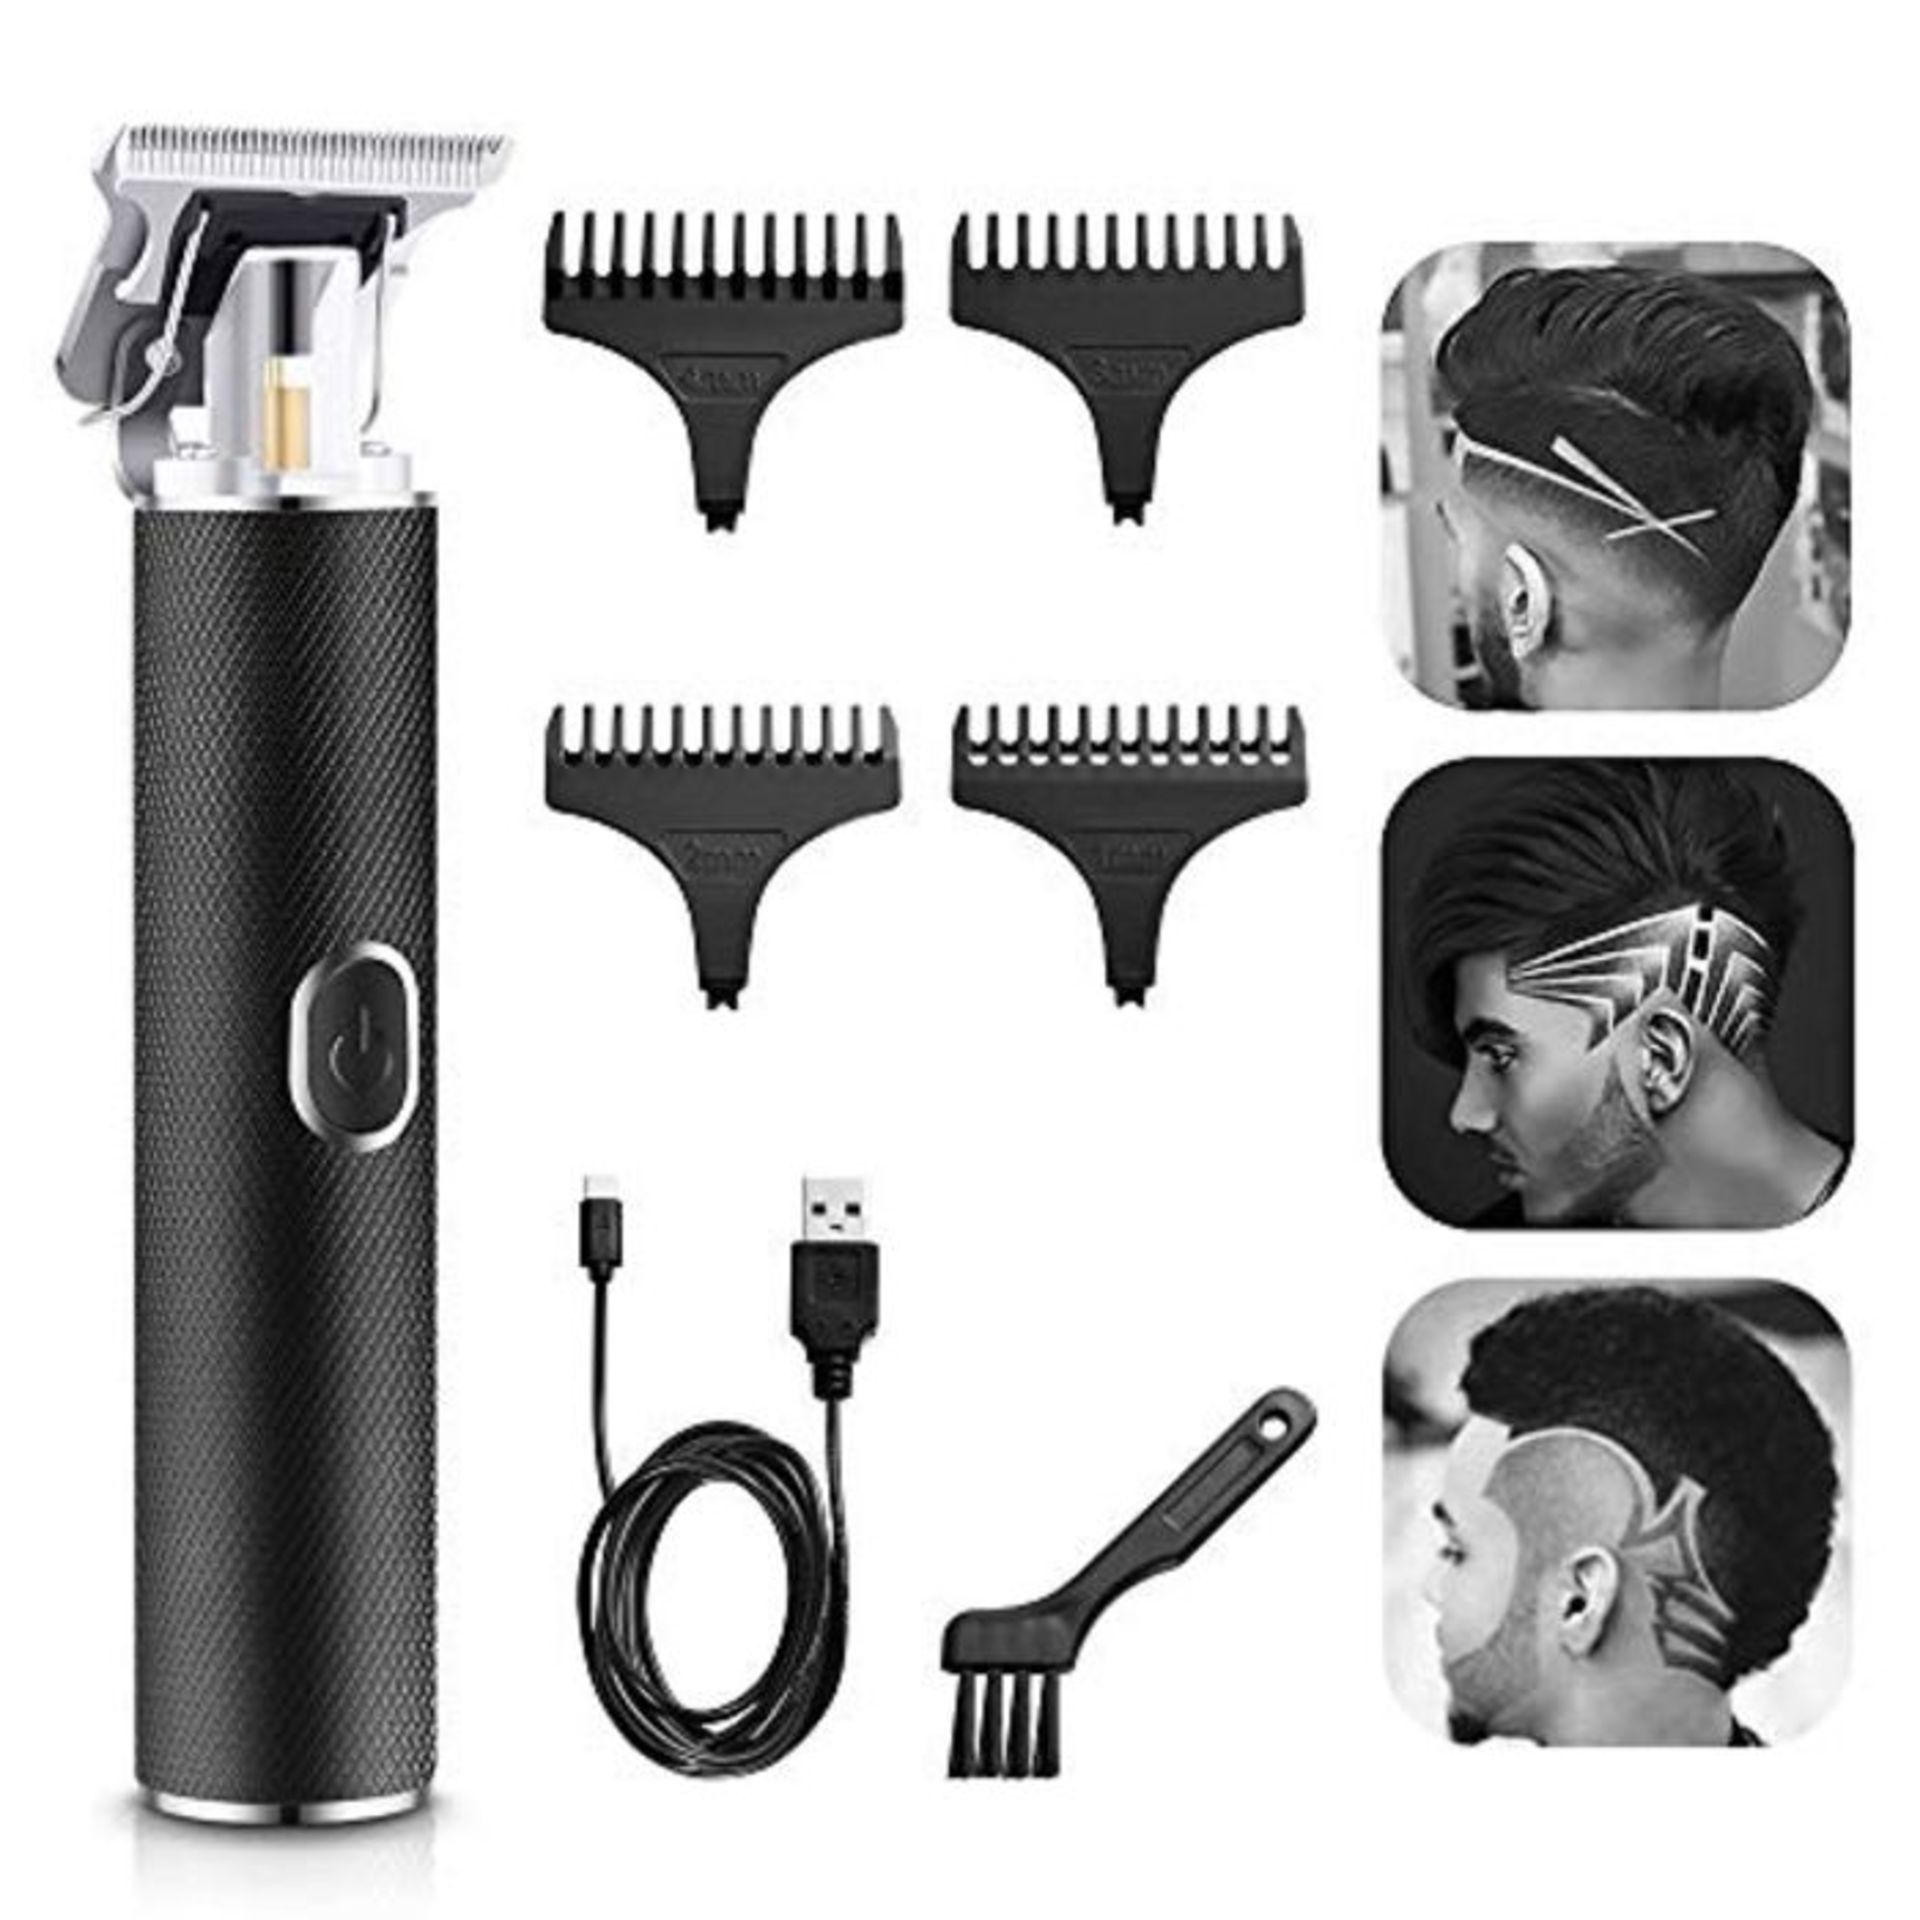 [BROKEN SCREEN] Hair Clippers for Men, Electric Pro Li Outliner T Blade Trimmers Recha